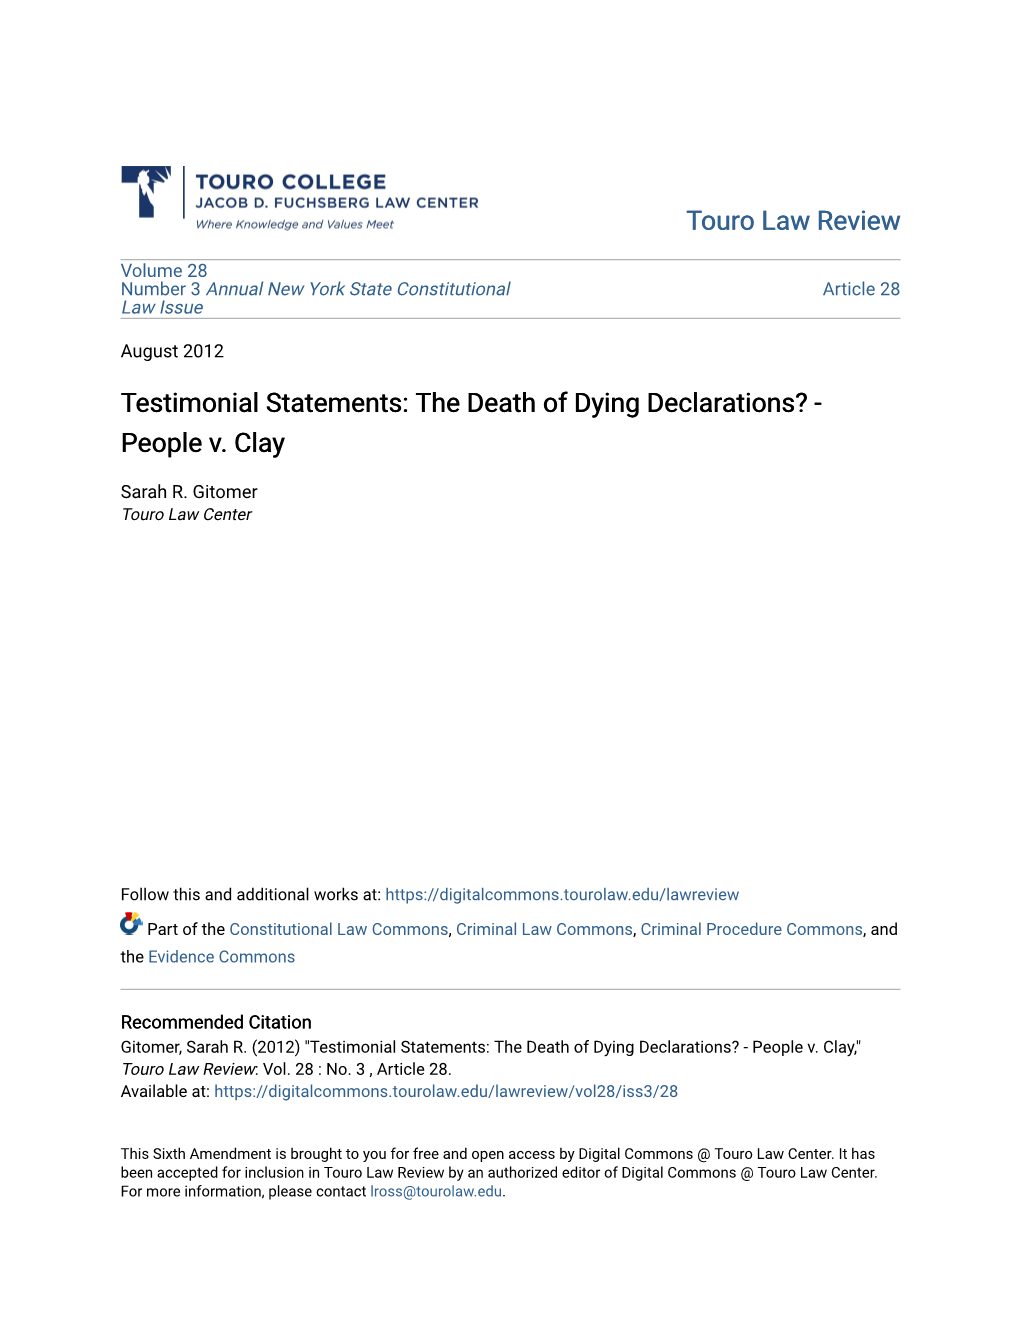 The Death of Dying Declarations? - People V